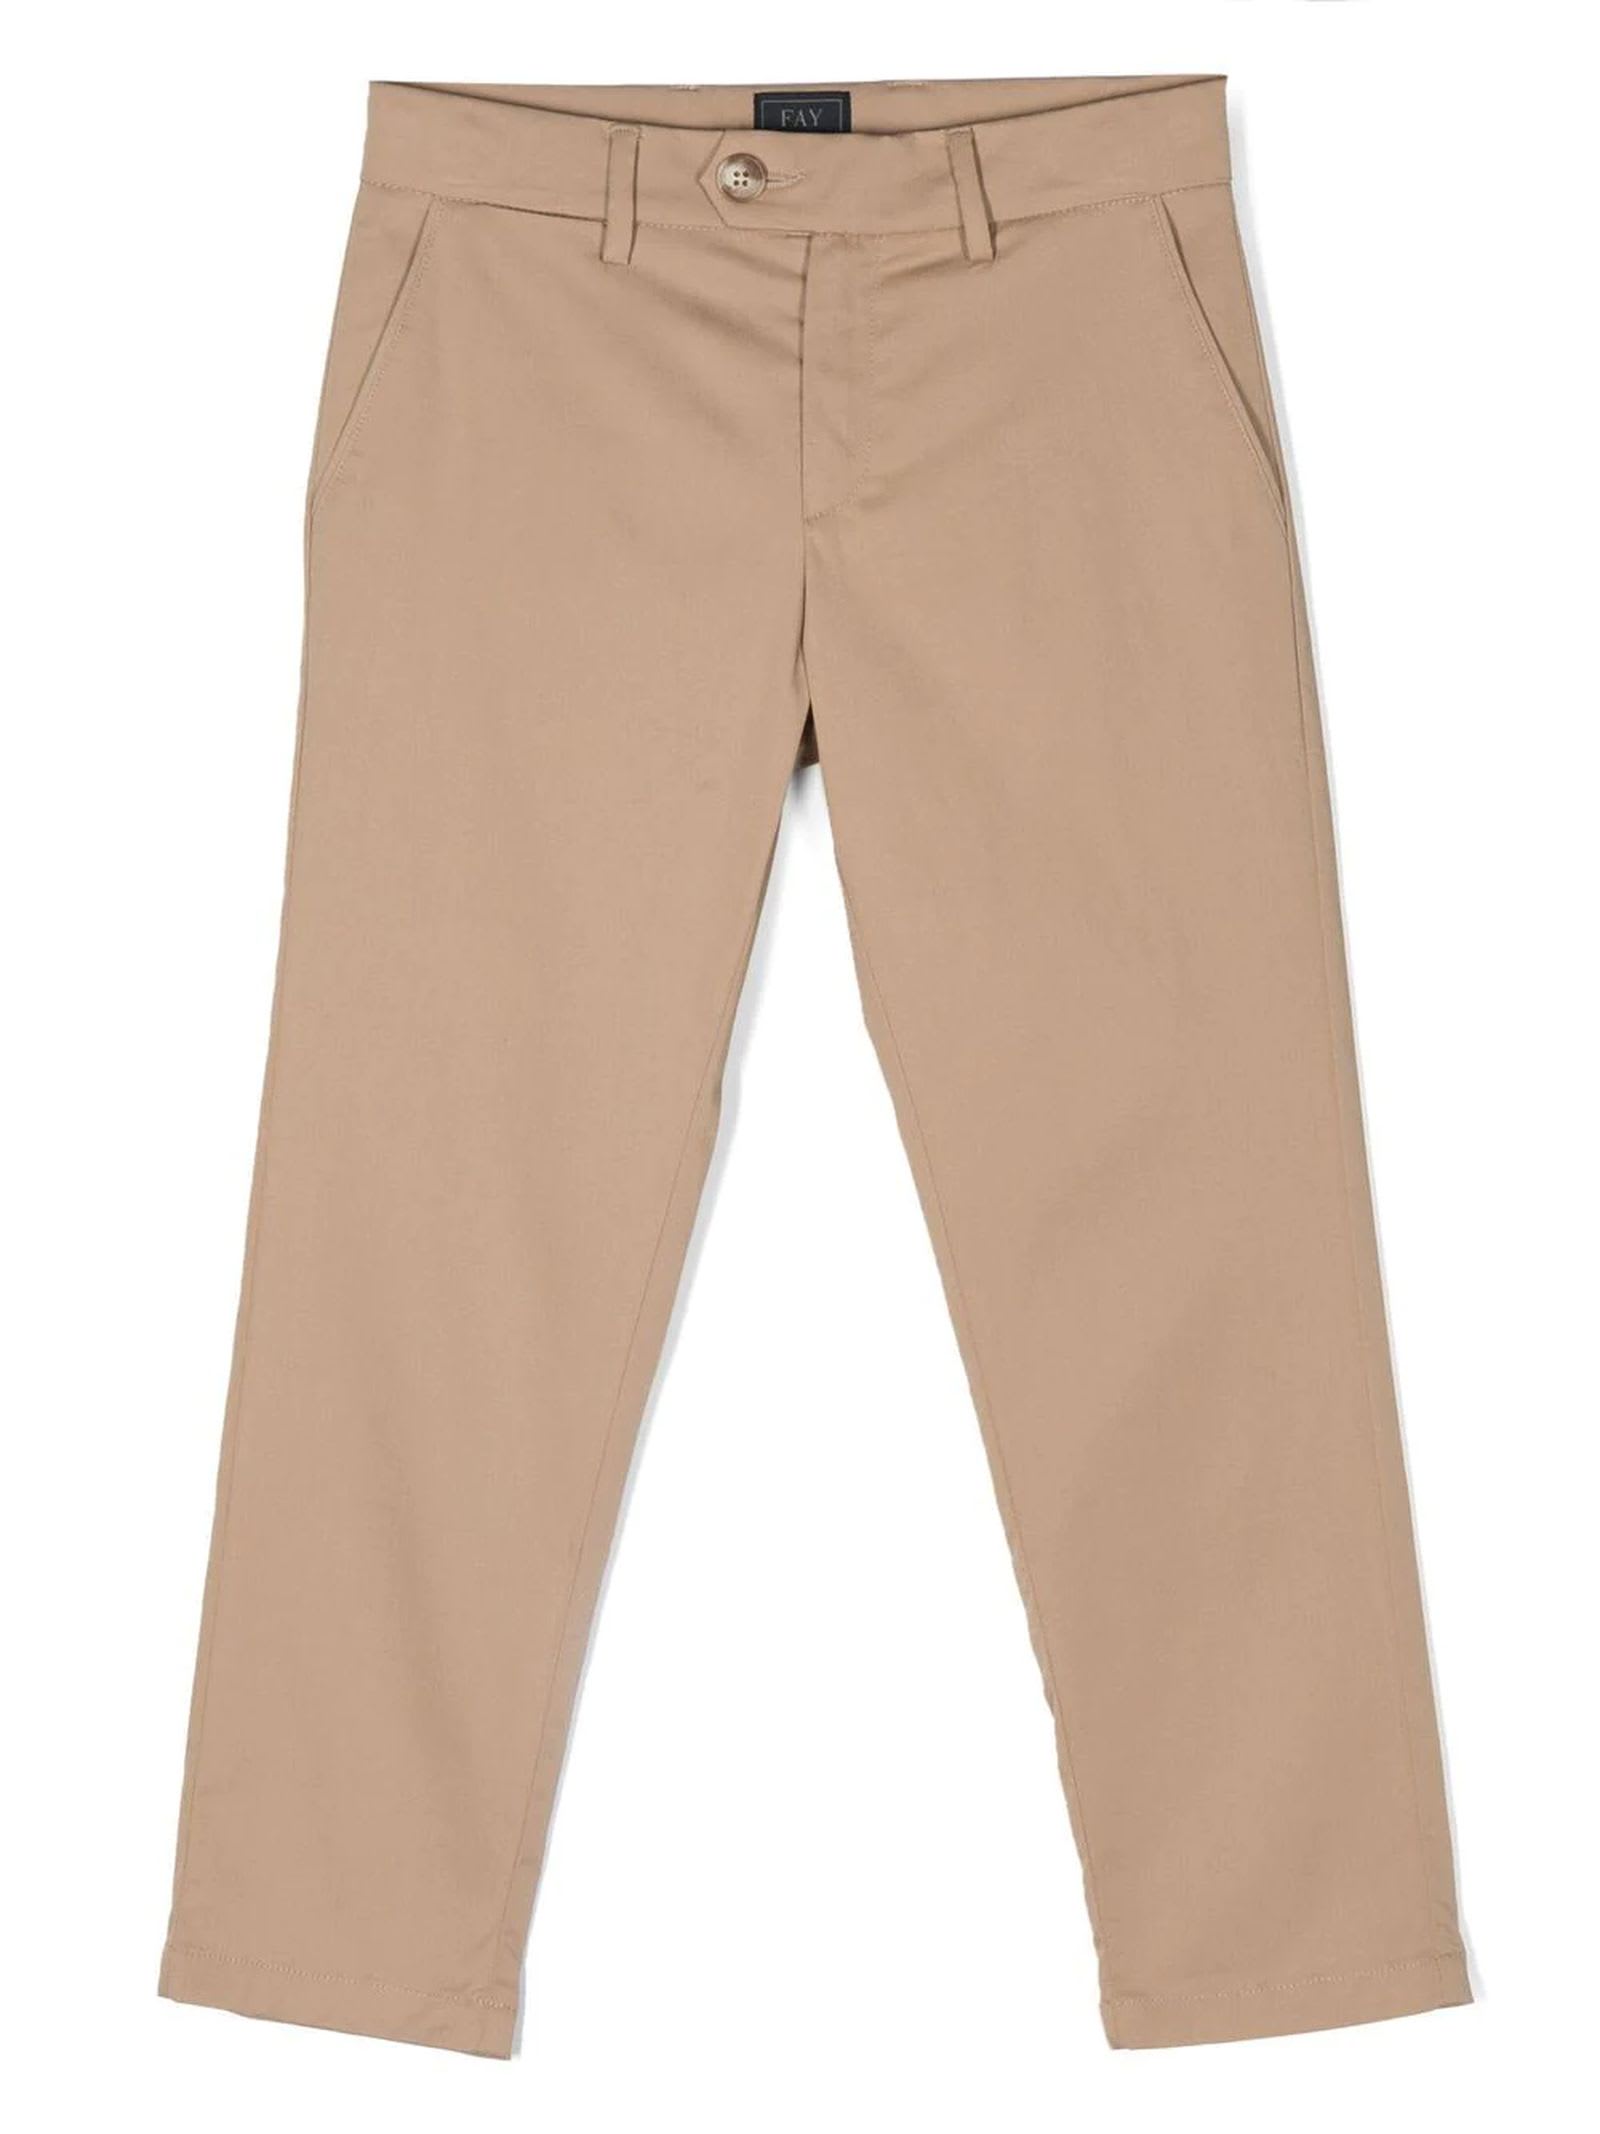 FAY BROWN COTTON TROUSERS